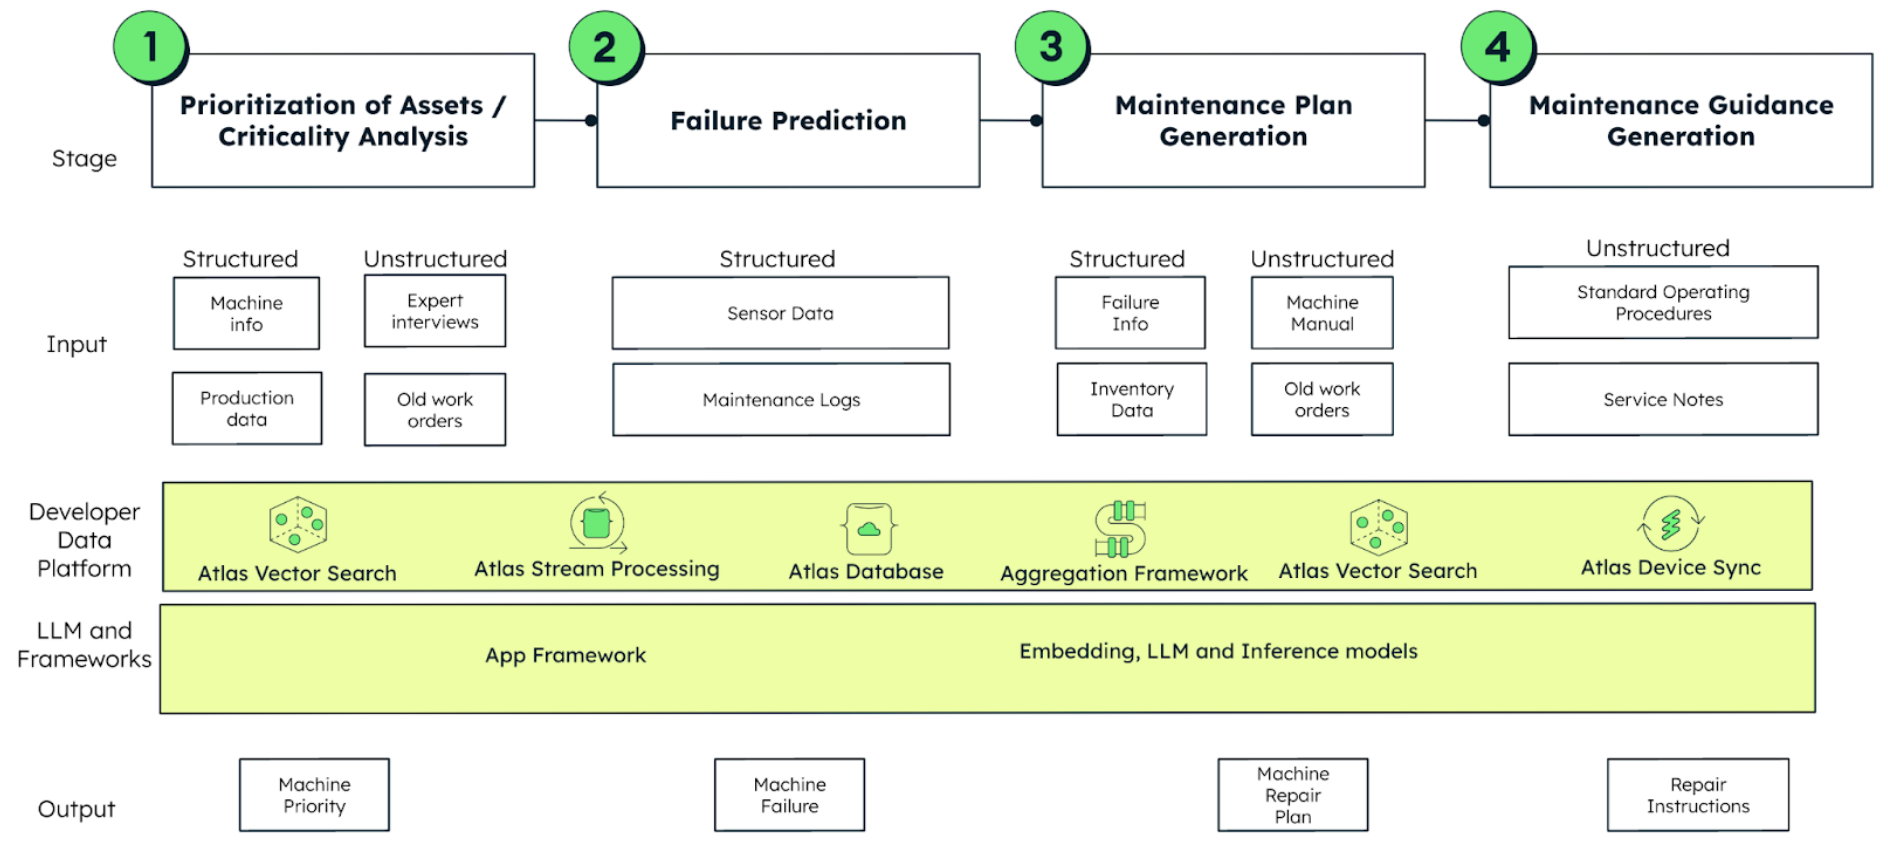 Graphic displaying how end-to-end predictive maintenance with MongoDB Atlas is achieved. The process occurs in 4 stages. In stage 1, titled prioritization of assets, the input contains both structured and unstructured data including machine info, production data, expert interviews, and old work order. The output is machine priority. In stage 2, titled Failure Prediction, the input is structured data such as sensor data and maintenance logs. The output is machine failure. The third stage, titled maintenance plan generation, the input is structured and unstructured data such as failure info, inventory data, machine manual, and old work orders. The outpu is machine repair plan. The final stage, maintenance guidance generation, has structured data such as standard operating procedures and service notes as it's inputs. The output is repair instructions. 